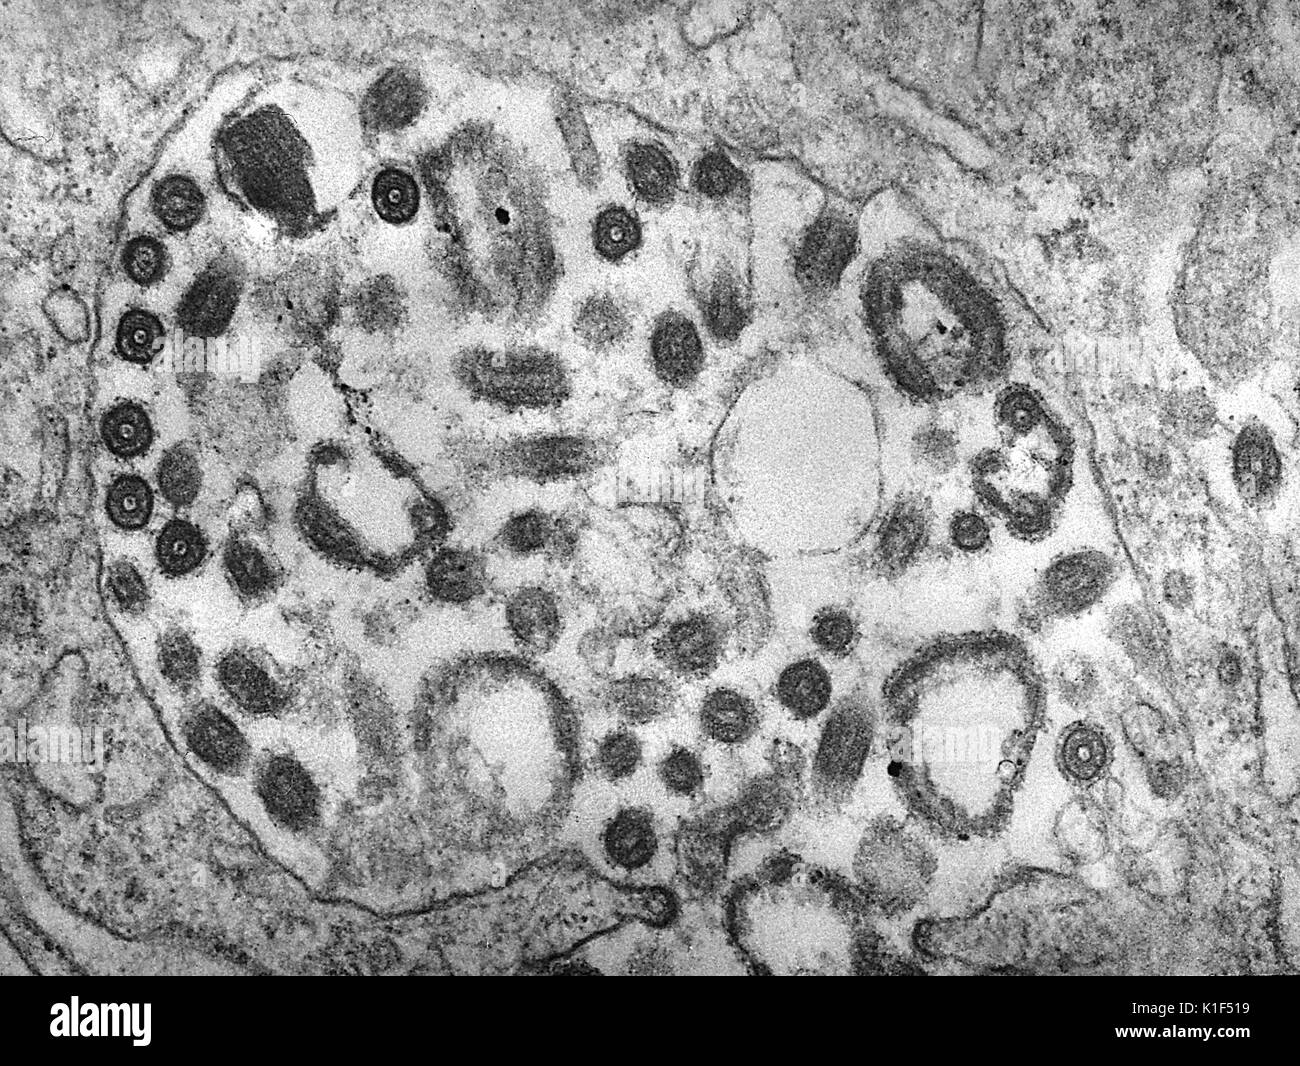 Transmission electron micrograph (TEM) of the Marburg virus. Marburg virus, first recognized in 1967, causes a severe type of hemorrhagic fever, which affects humans, as well as non-human primates. Image courtesy CDC/Dr. Fred Murphy, Sylvia Whitfield, 1975. Stock Photo